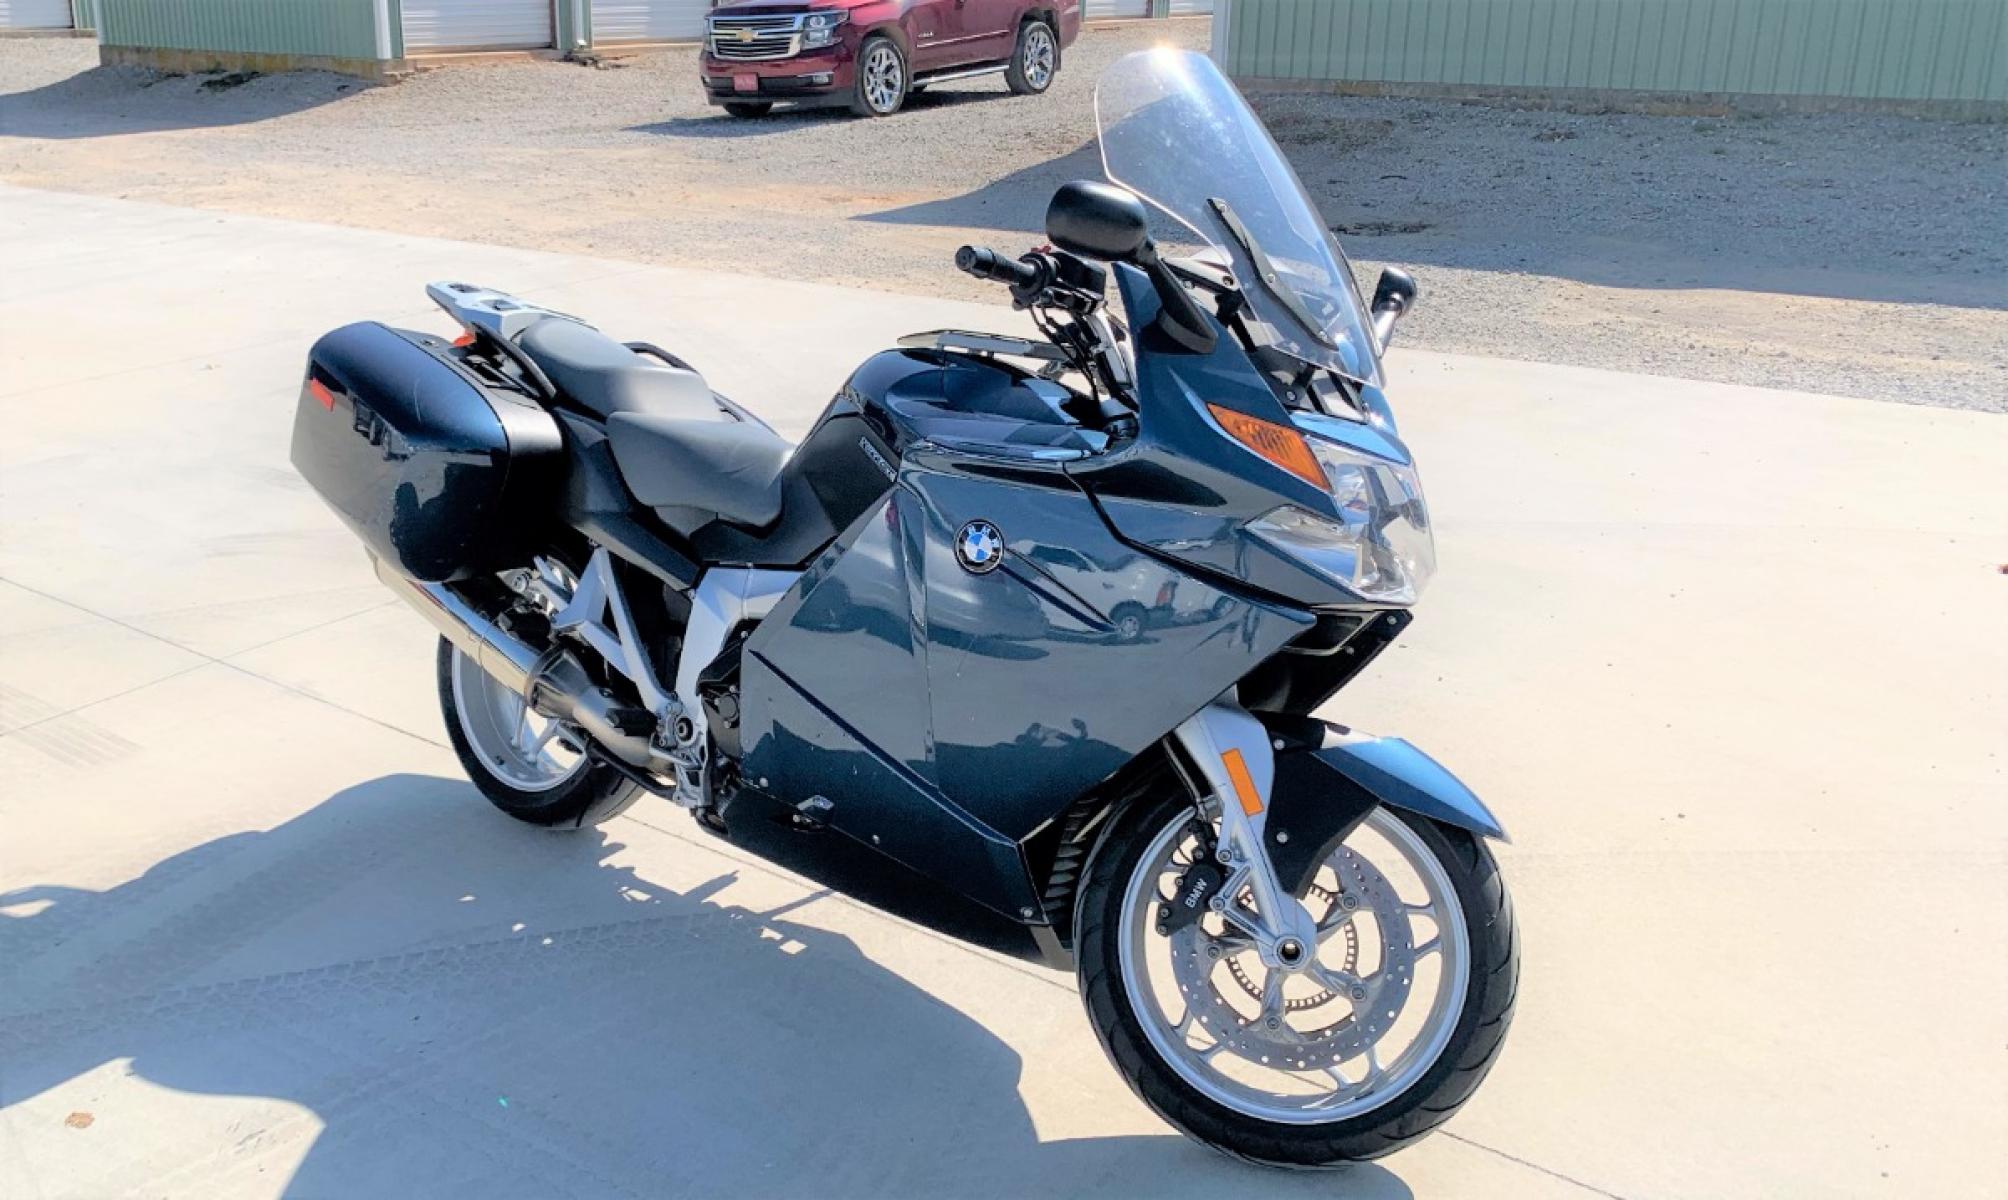 2007 BLUE BMW K1200GT K1200 (WB10597087Z) with an 1157CC engine, located at 17760 HWY 62, MORRIS, 74445, 35.609104, -95.877060 - THE 2007 BMW K1200GT IS A SPORT-TOURING MOTORCYCLE MADE BY BMW. THE SECOND GENERATION K1200GT, INTRODUCED IN 2006, USES ESSENTULY THE SAME INLINE-4 ENGINE AS THE BMW K1200S SPORTSBIKE, WHICH HELD THE WORLD SPEED RECORD IN 2005 FOR ITS CLASS AT 279.33 km/h (173.57 mph), AND THE K1200R. THE NEW MODEL - Photo #3